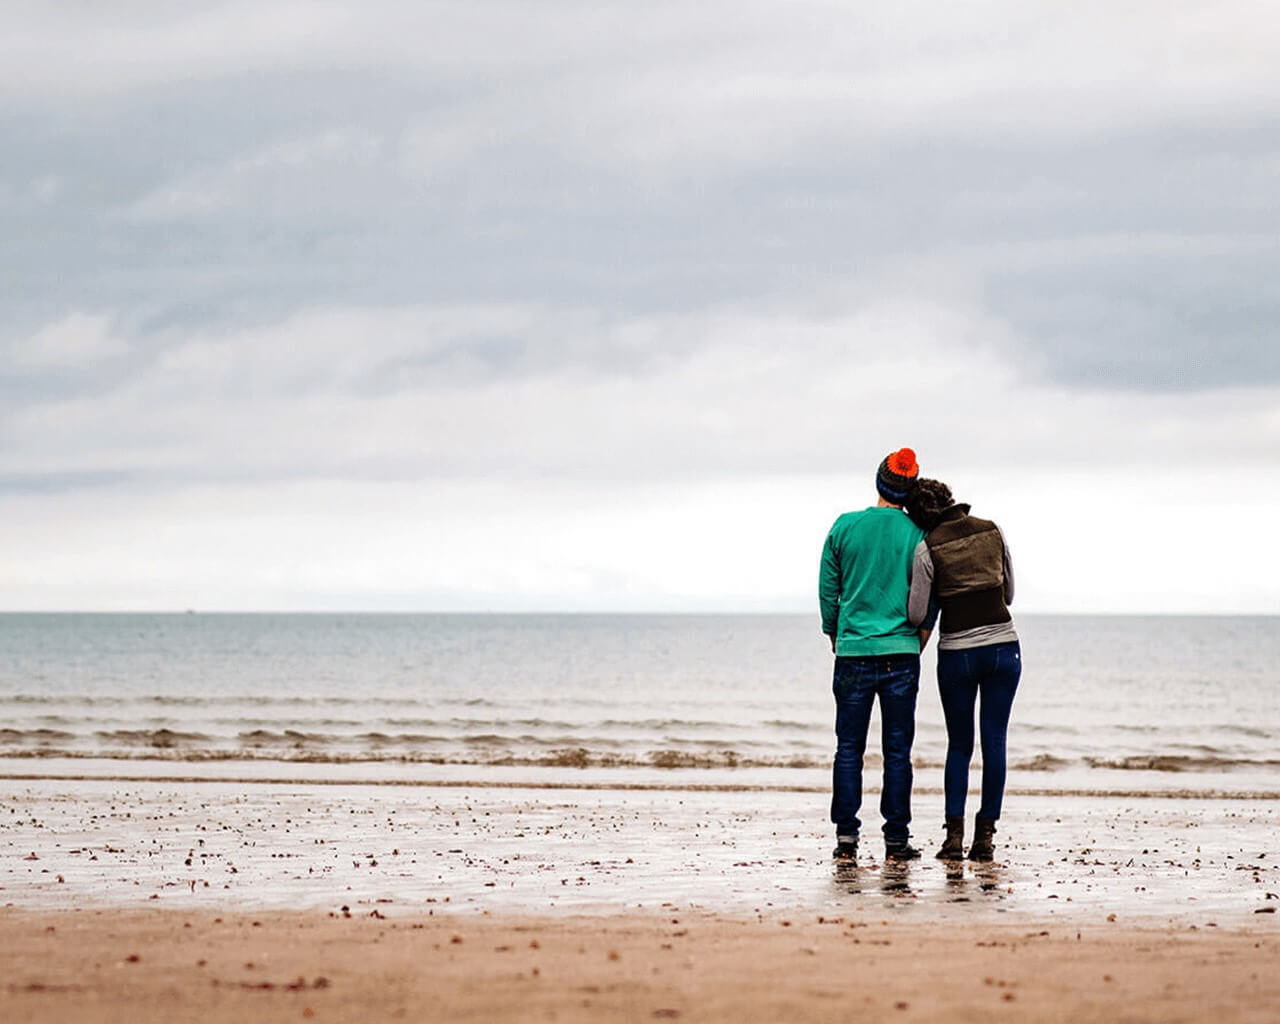 A tired couple standing on a beach looking out to sea. The woman is resting her head on the man's shoulder.